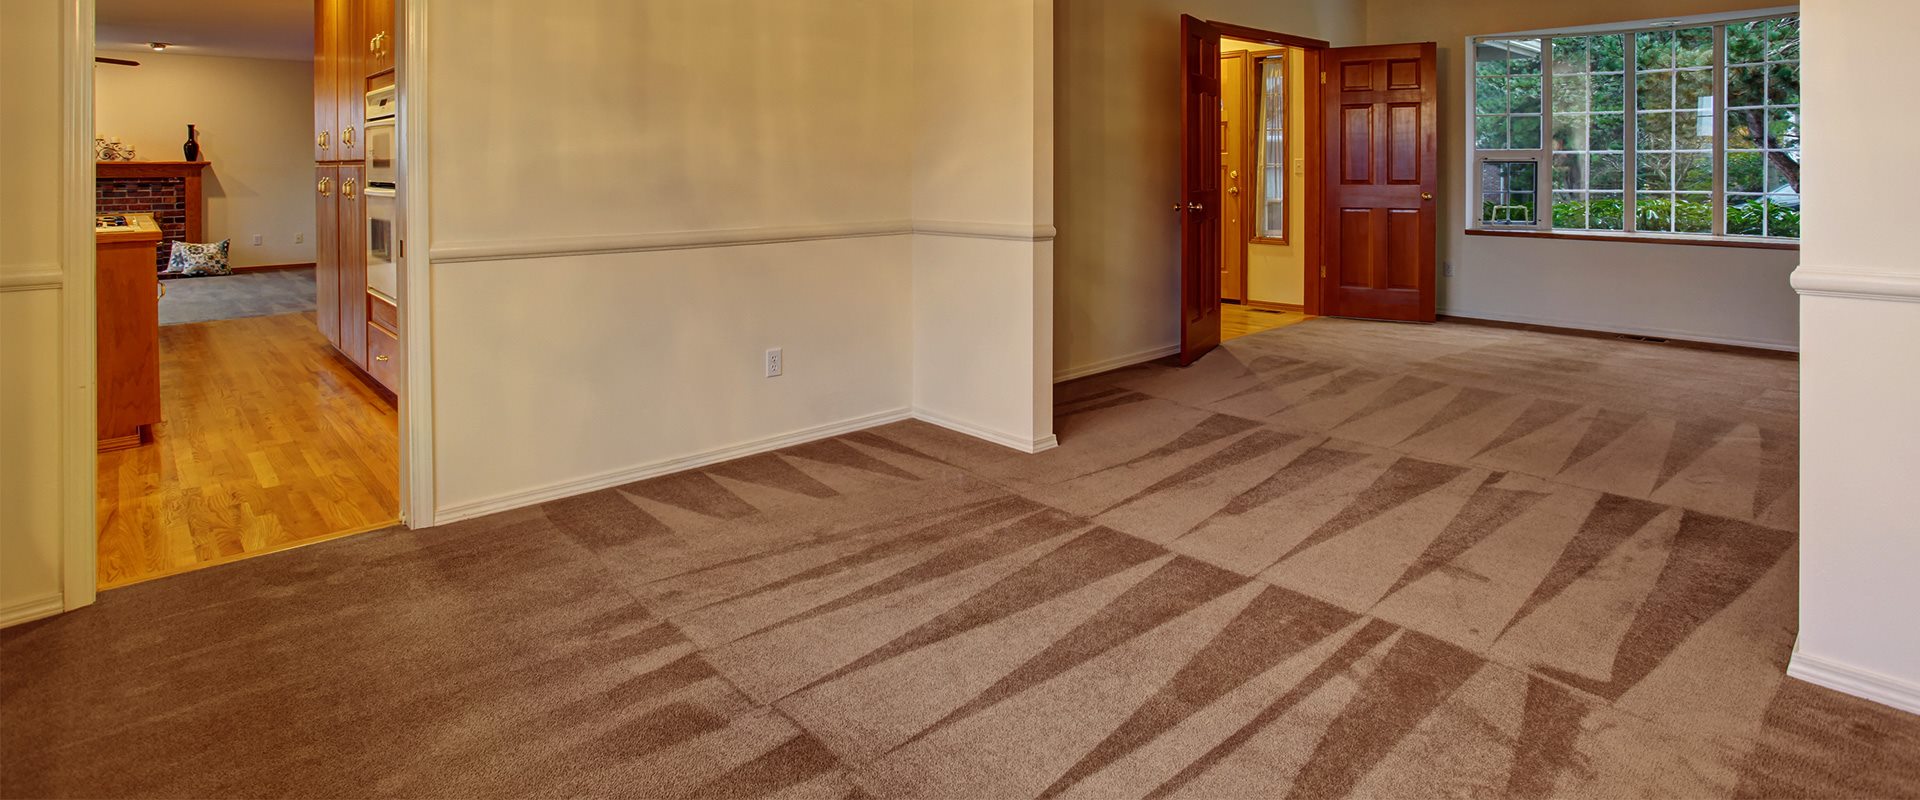 How Carpet Cleaning Can Help Improve Your Home’s Indoor Air Quality?